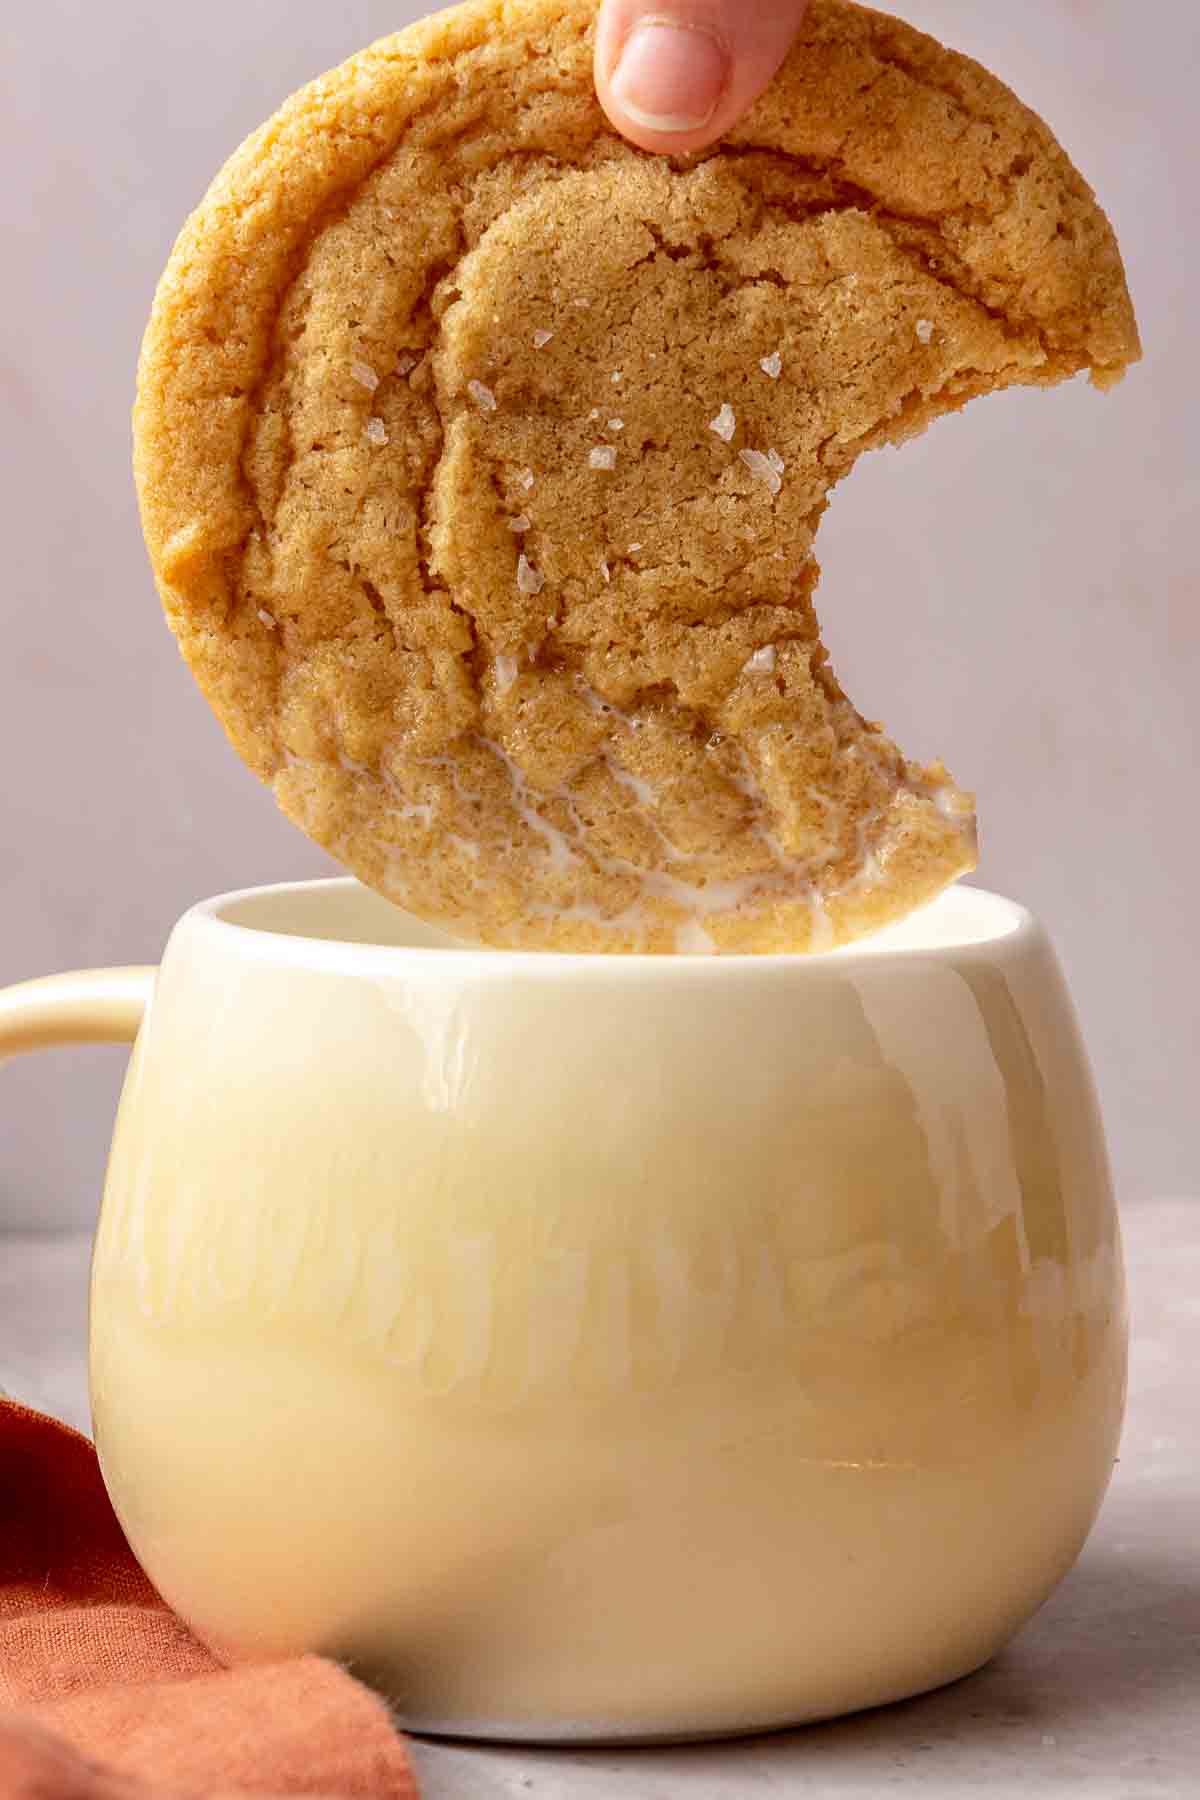 Dipping a cookie into a mug of milk.